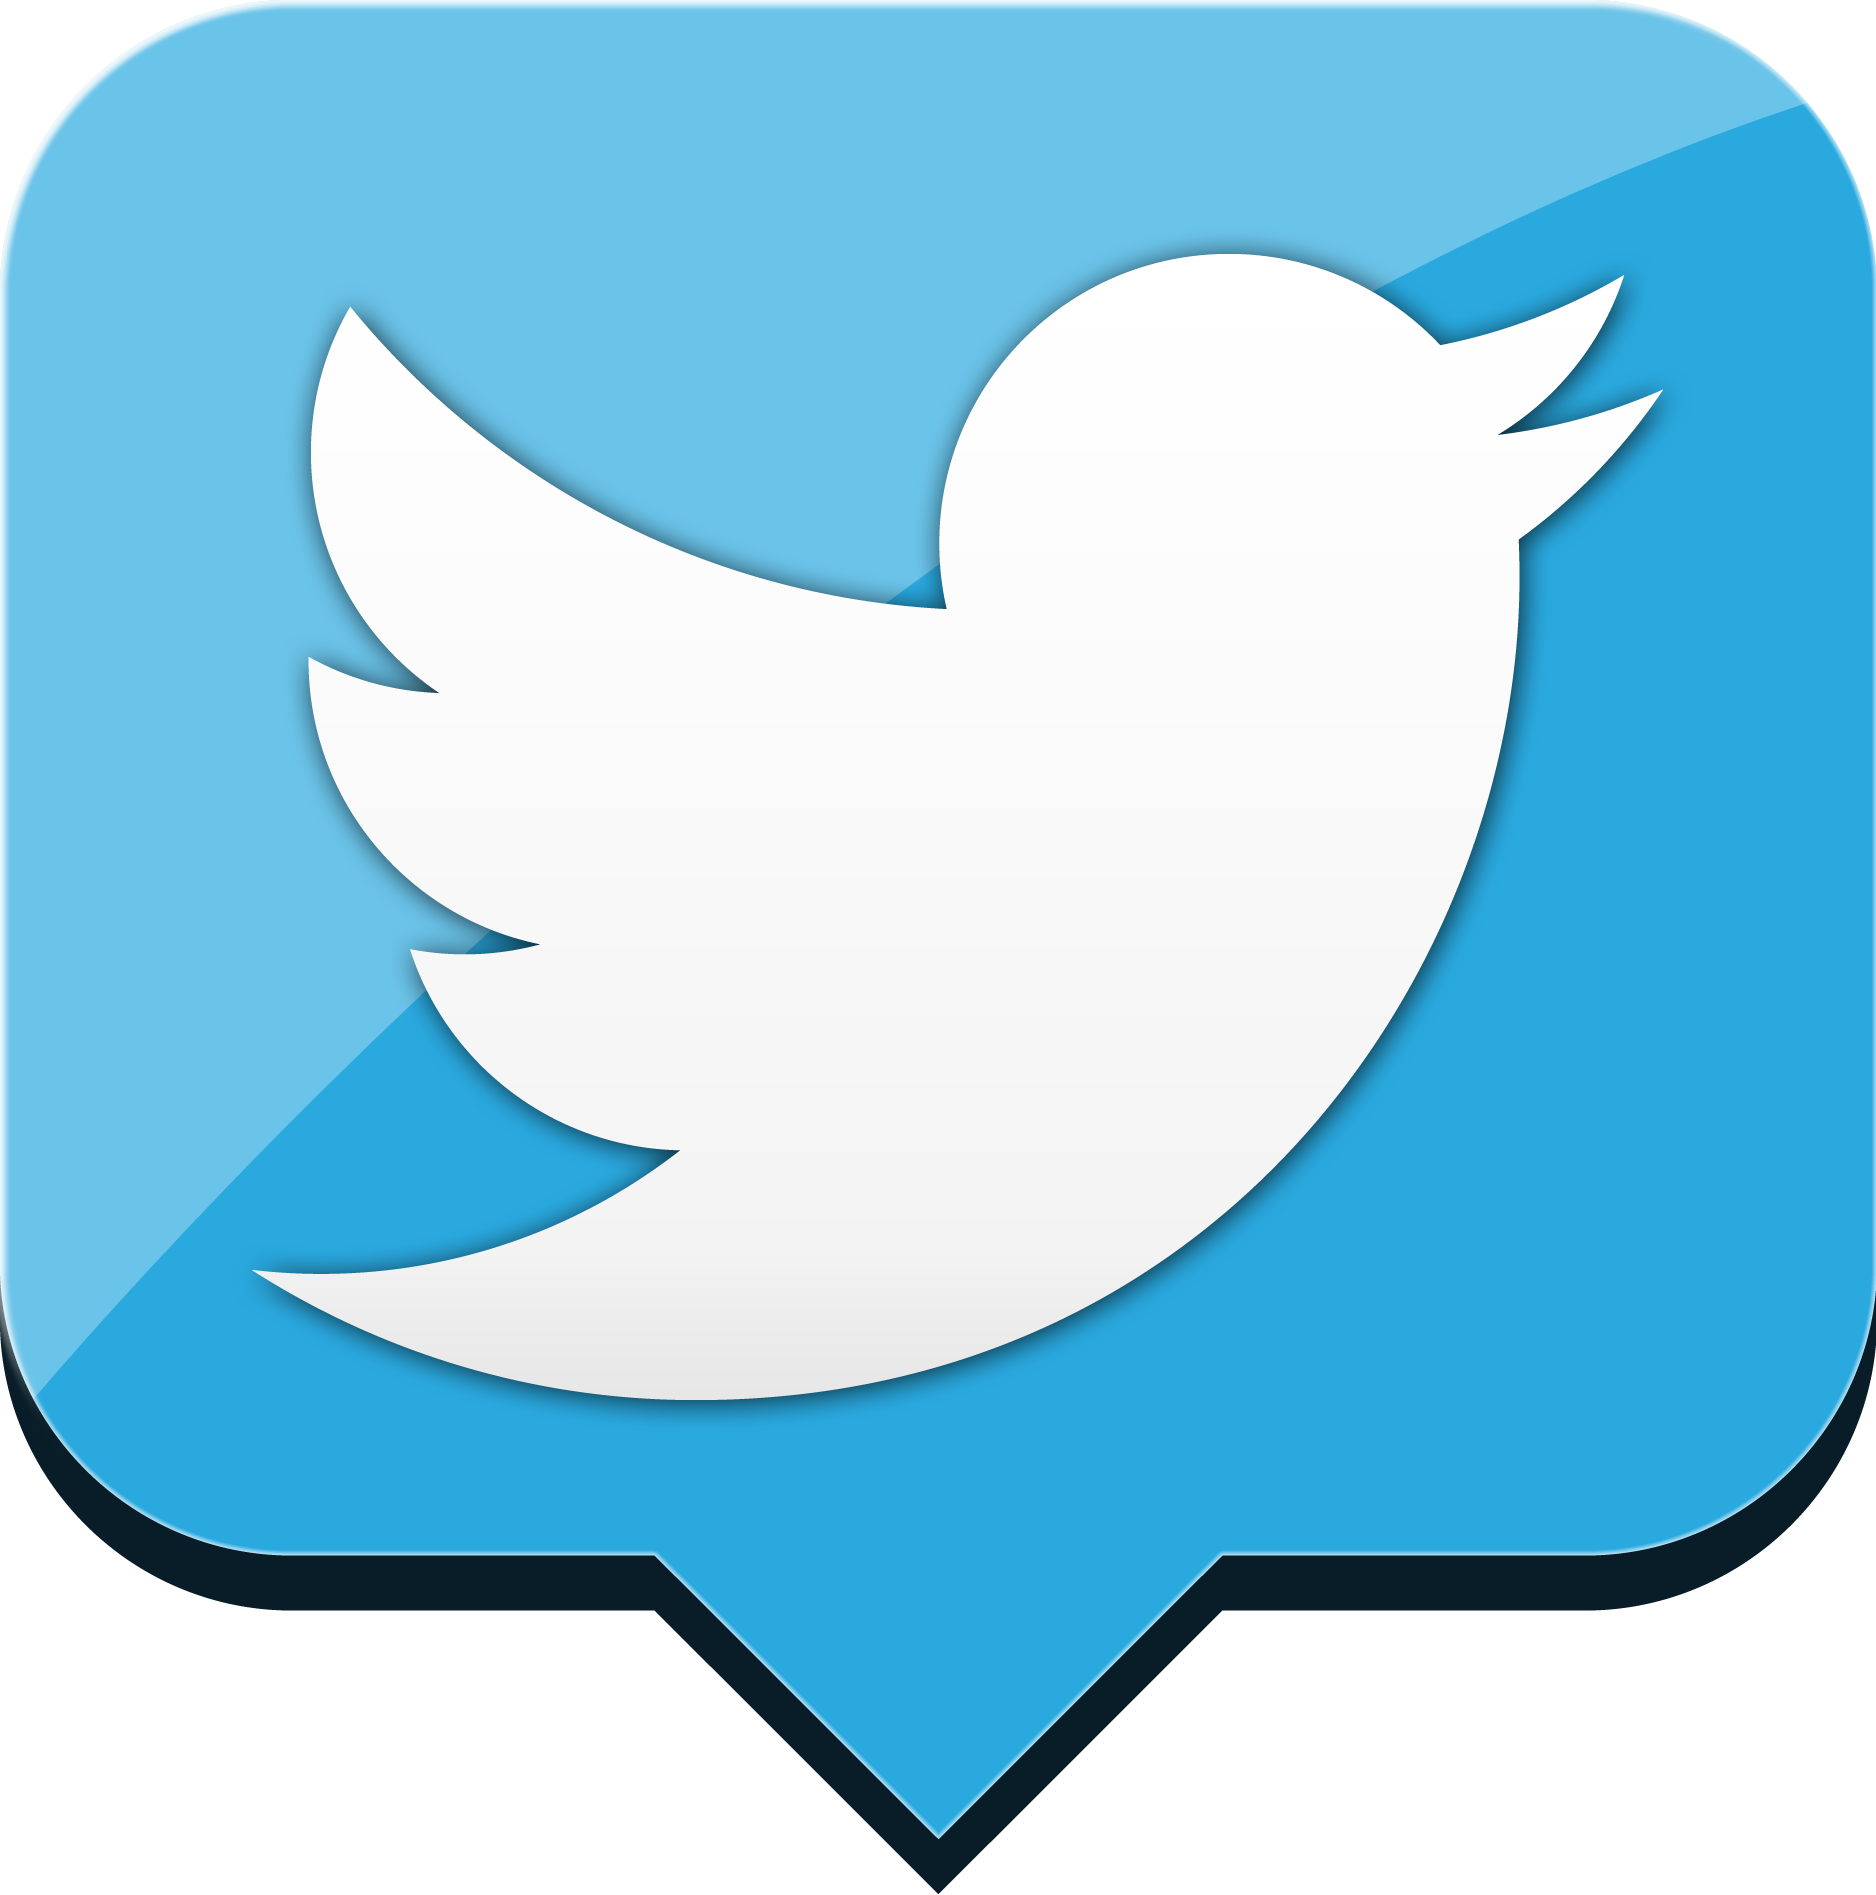 25 Industrial & Manufacturing Twitter Profiles to Follow